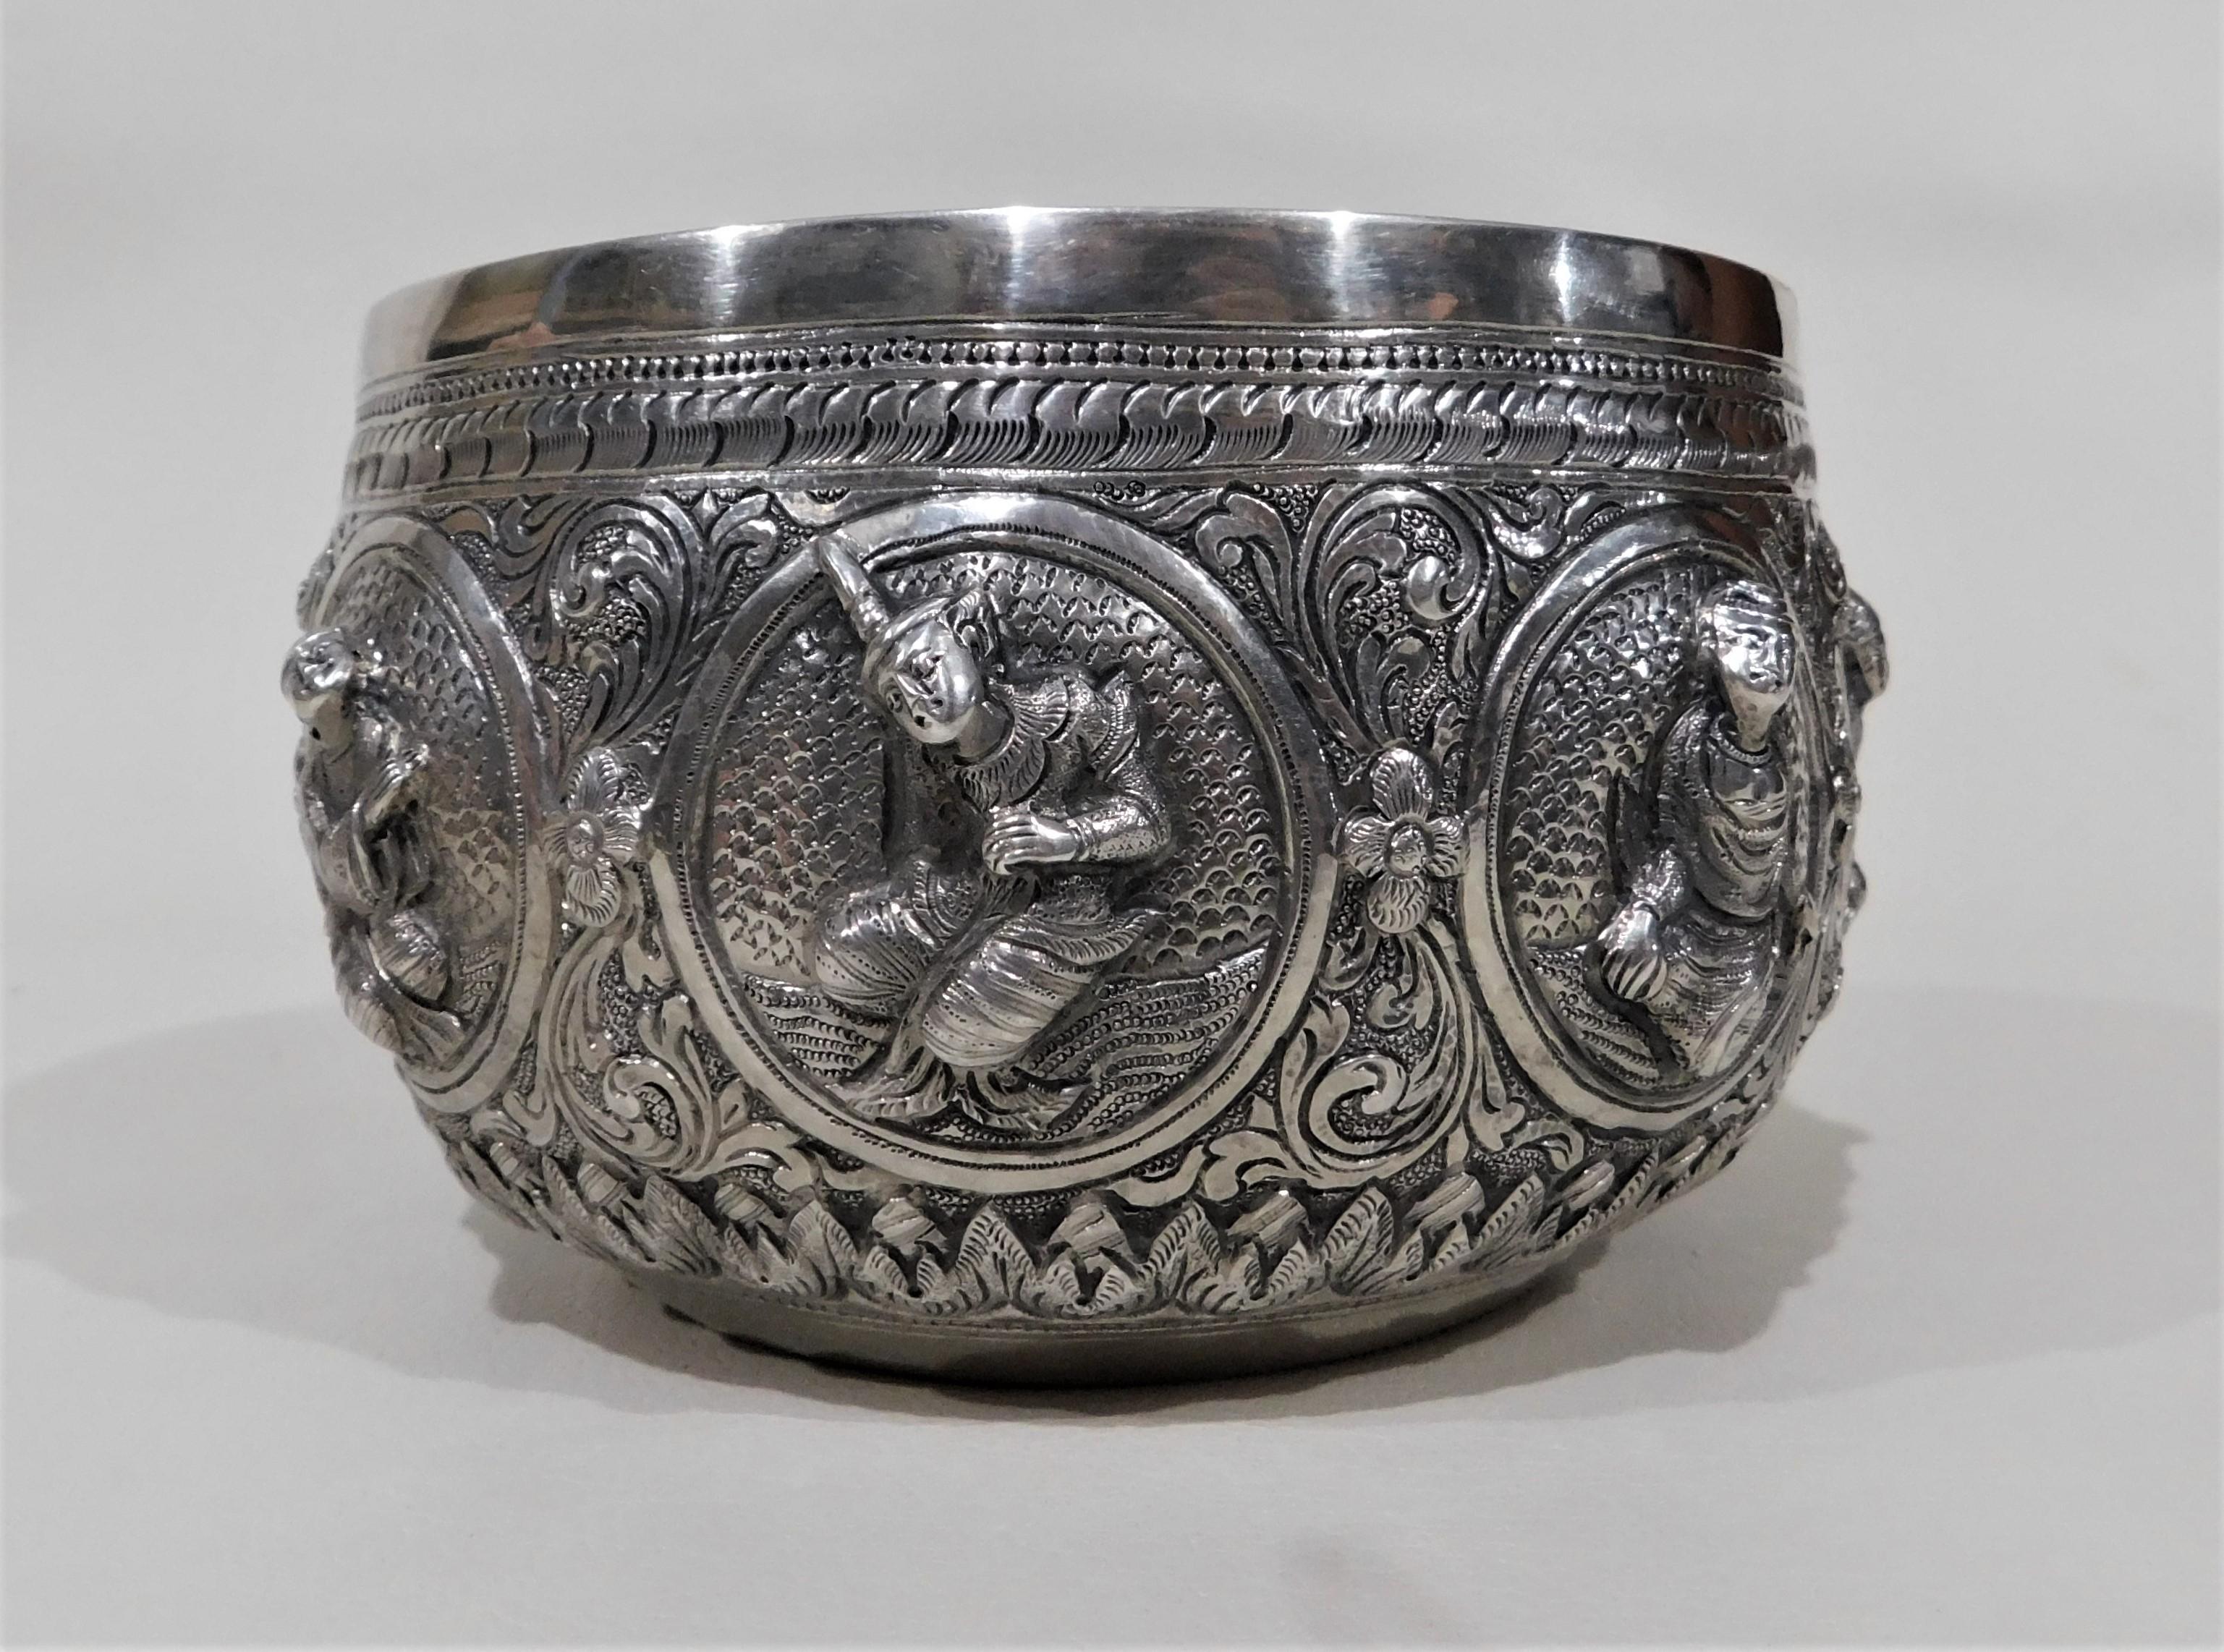 Handmade silver Anglo-Indian bowl with eight figures each featuring a different pose. Ornate engraved peacock on the bottom of bowl.